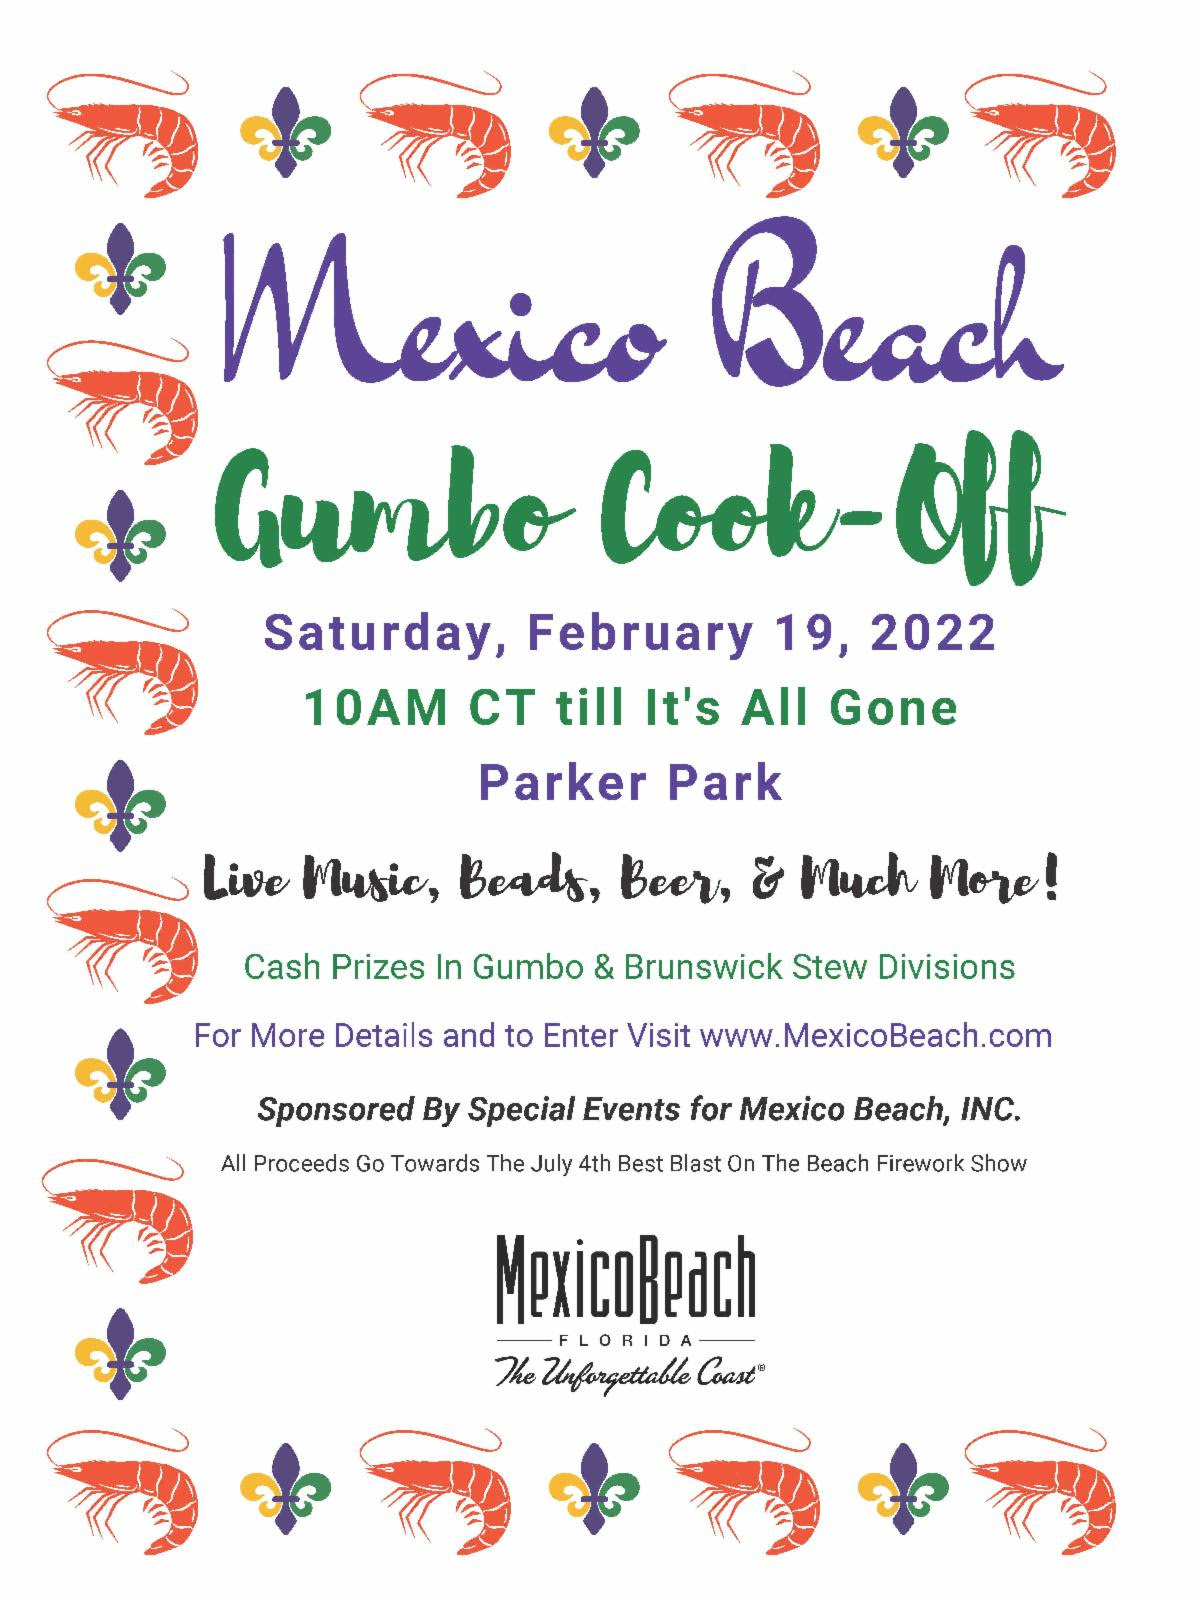 Mexico Beach Gumbo Cookoff, Saturday, February 19, 2022 at Parker Park. Live music, beads, beer, and much more! Cash prizes in Gumbo & Brunswick Stew divisions. For more details and to enter visit www.mexicobeach.com. Sponsored by Special Events for Mexico Beach Inc. All proceeds go towards the July 4th Best Blast on the Beach Firework Show.